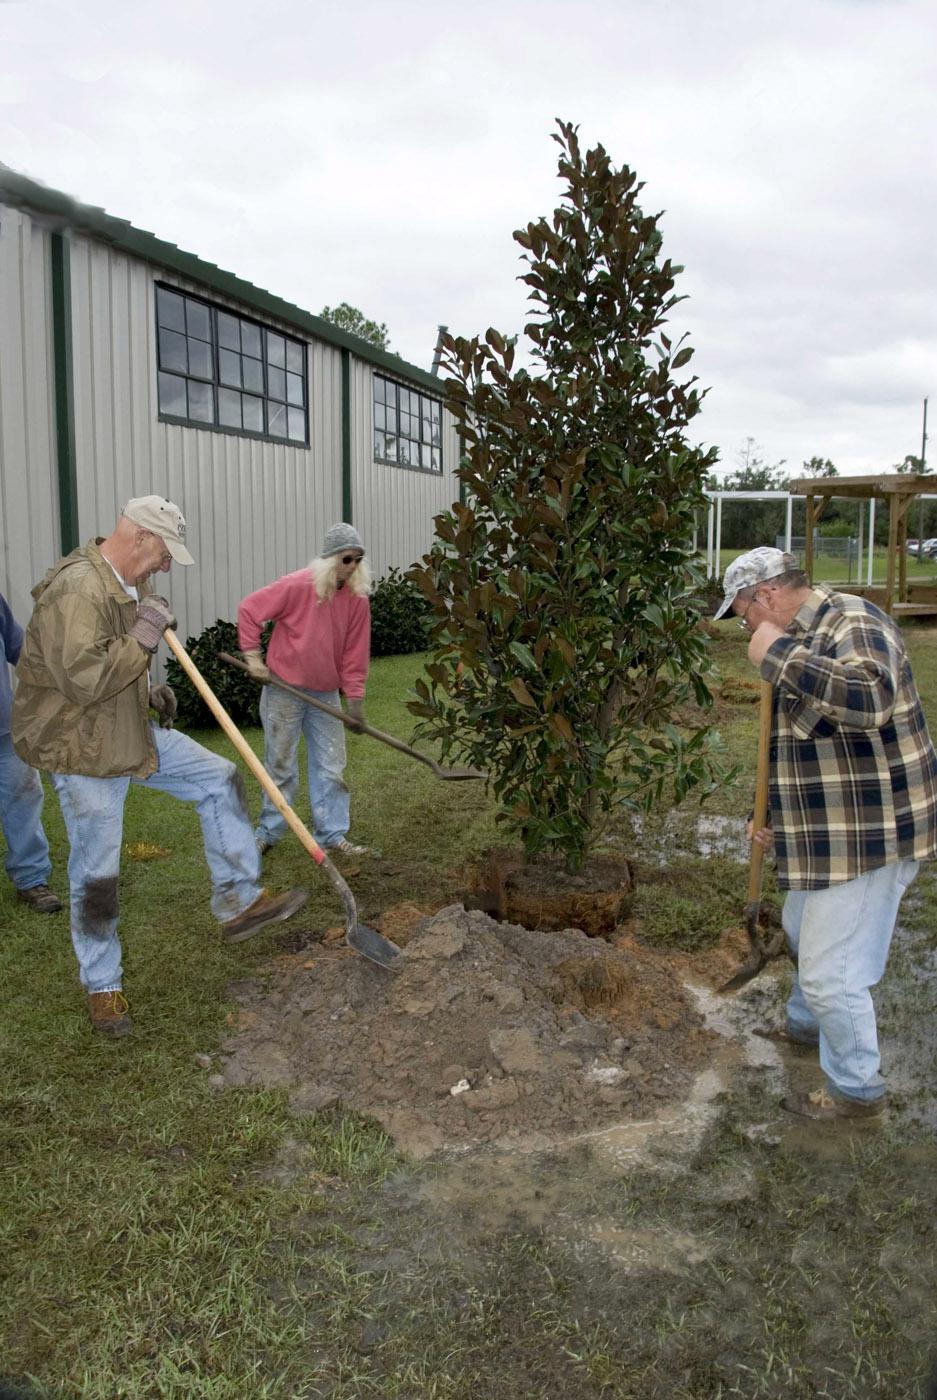 Lincoln County Master Gardener Homer Richardson, Karen Peresich and Steve Edge of Gautier plant trees at Pineville Elementary on Menge Road in Pass Christian as part of the Mississippi Master Gardeners Operation Rejuvenation on the Gulf Coast.  (Photo By Marco Nicovich)